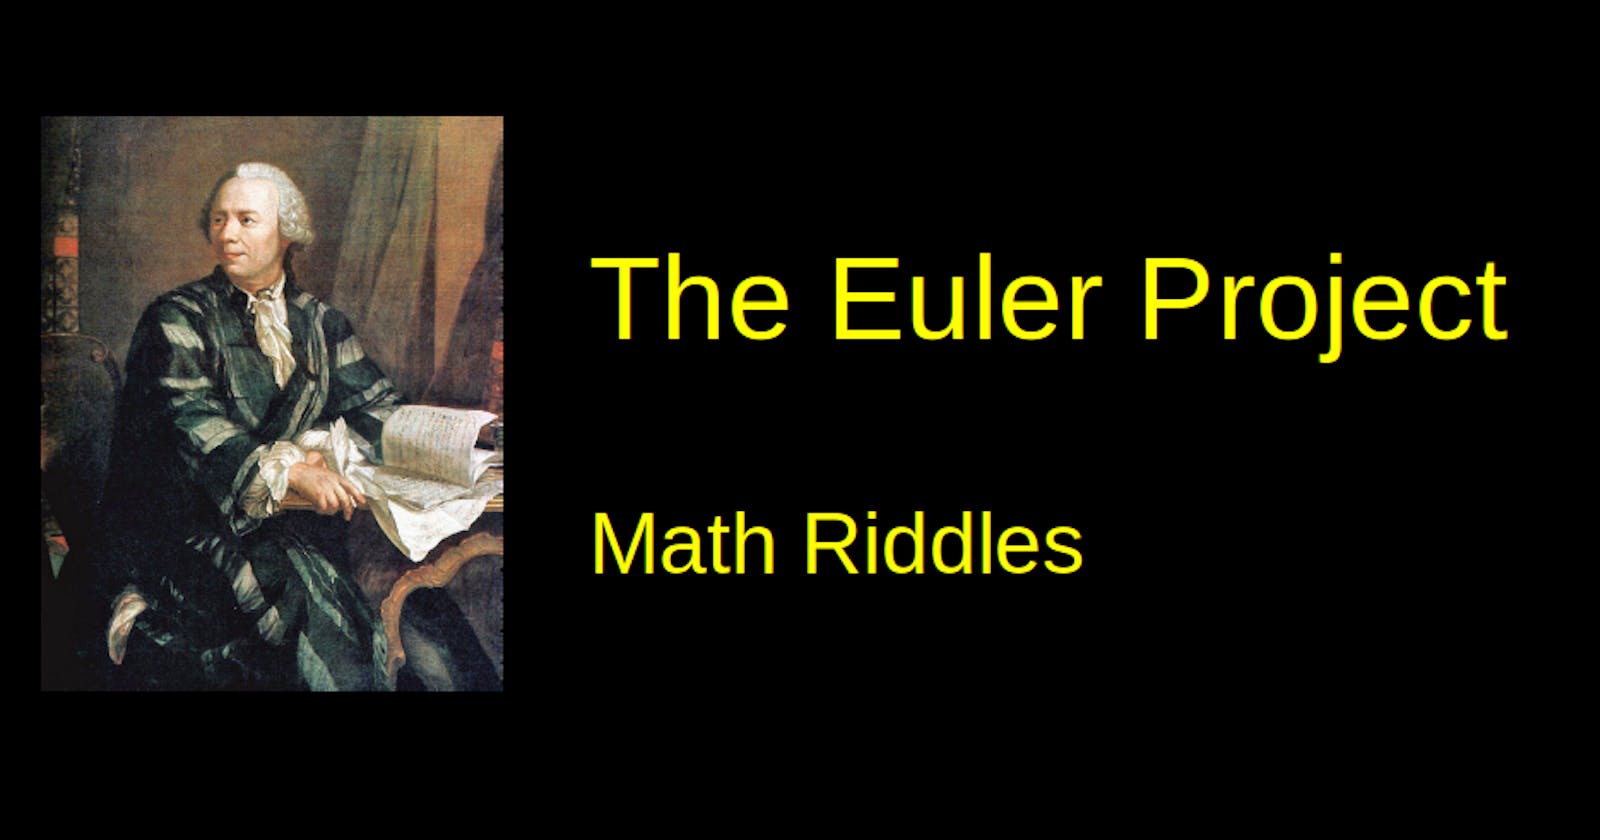 About the Euler Project